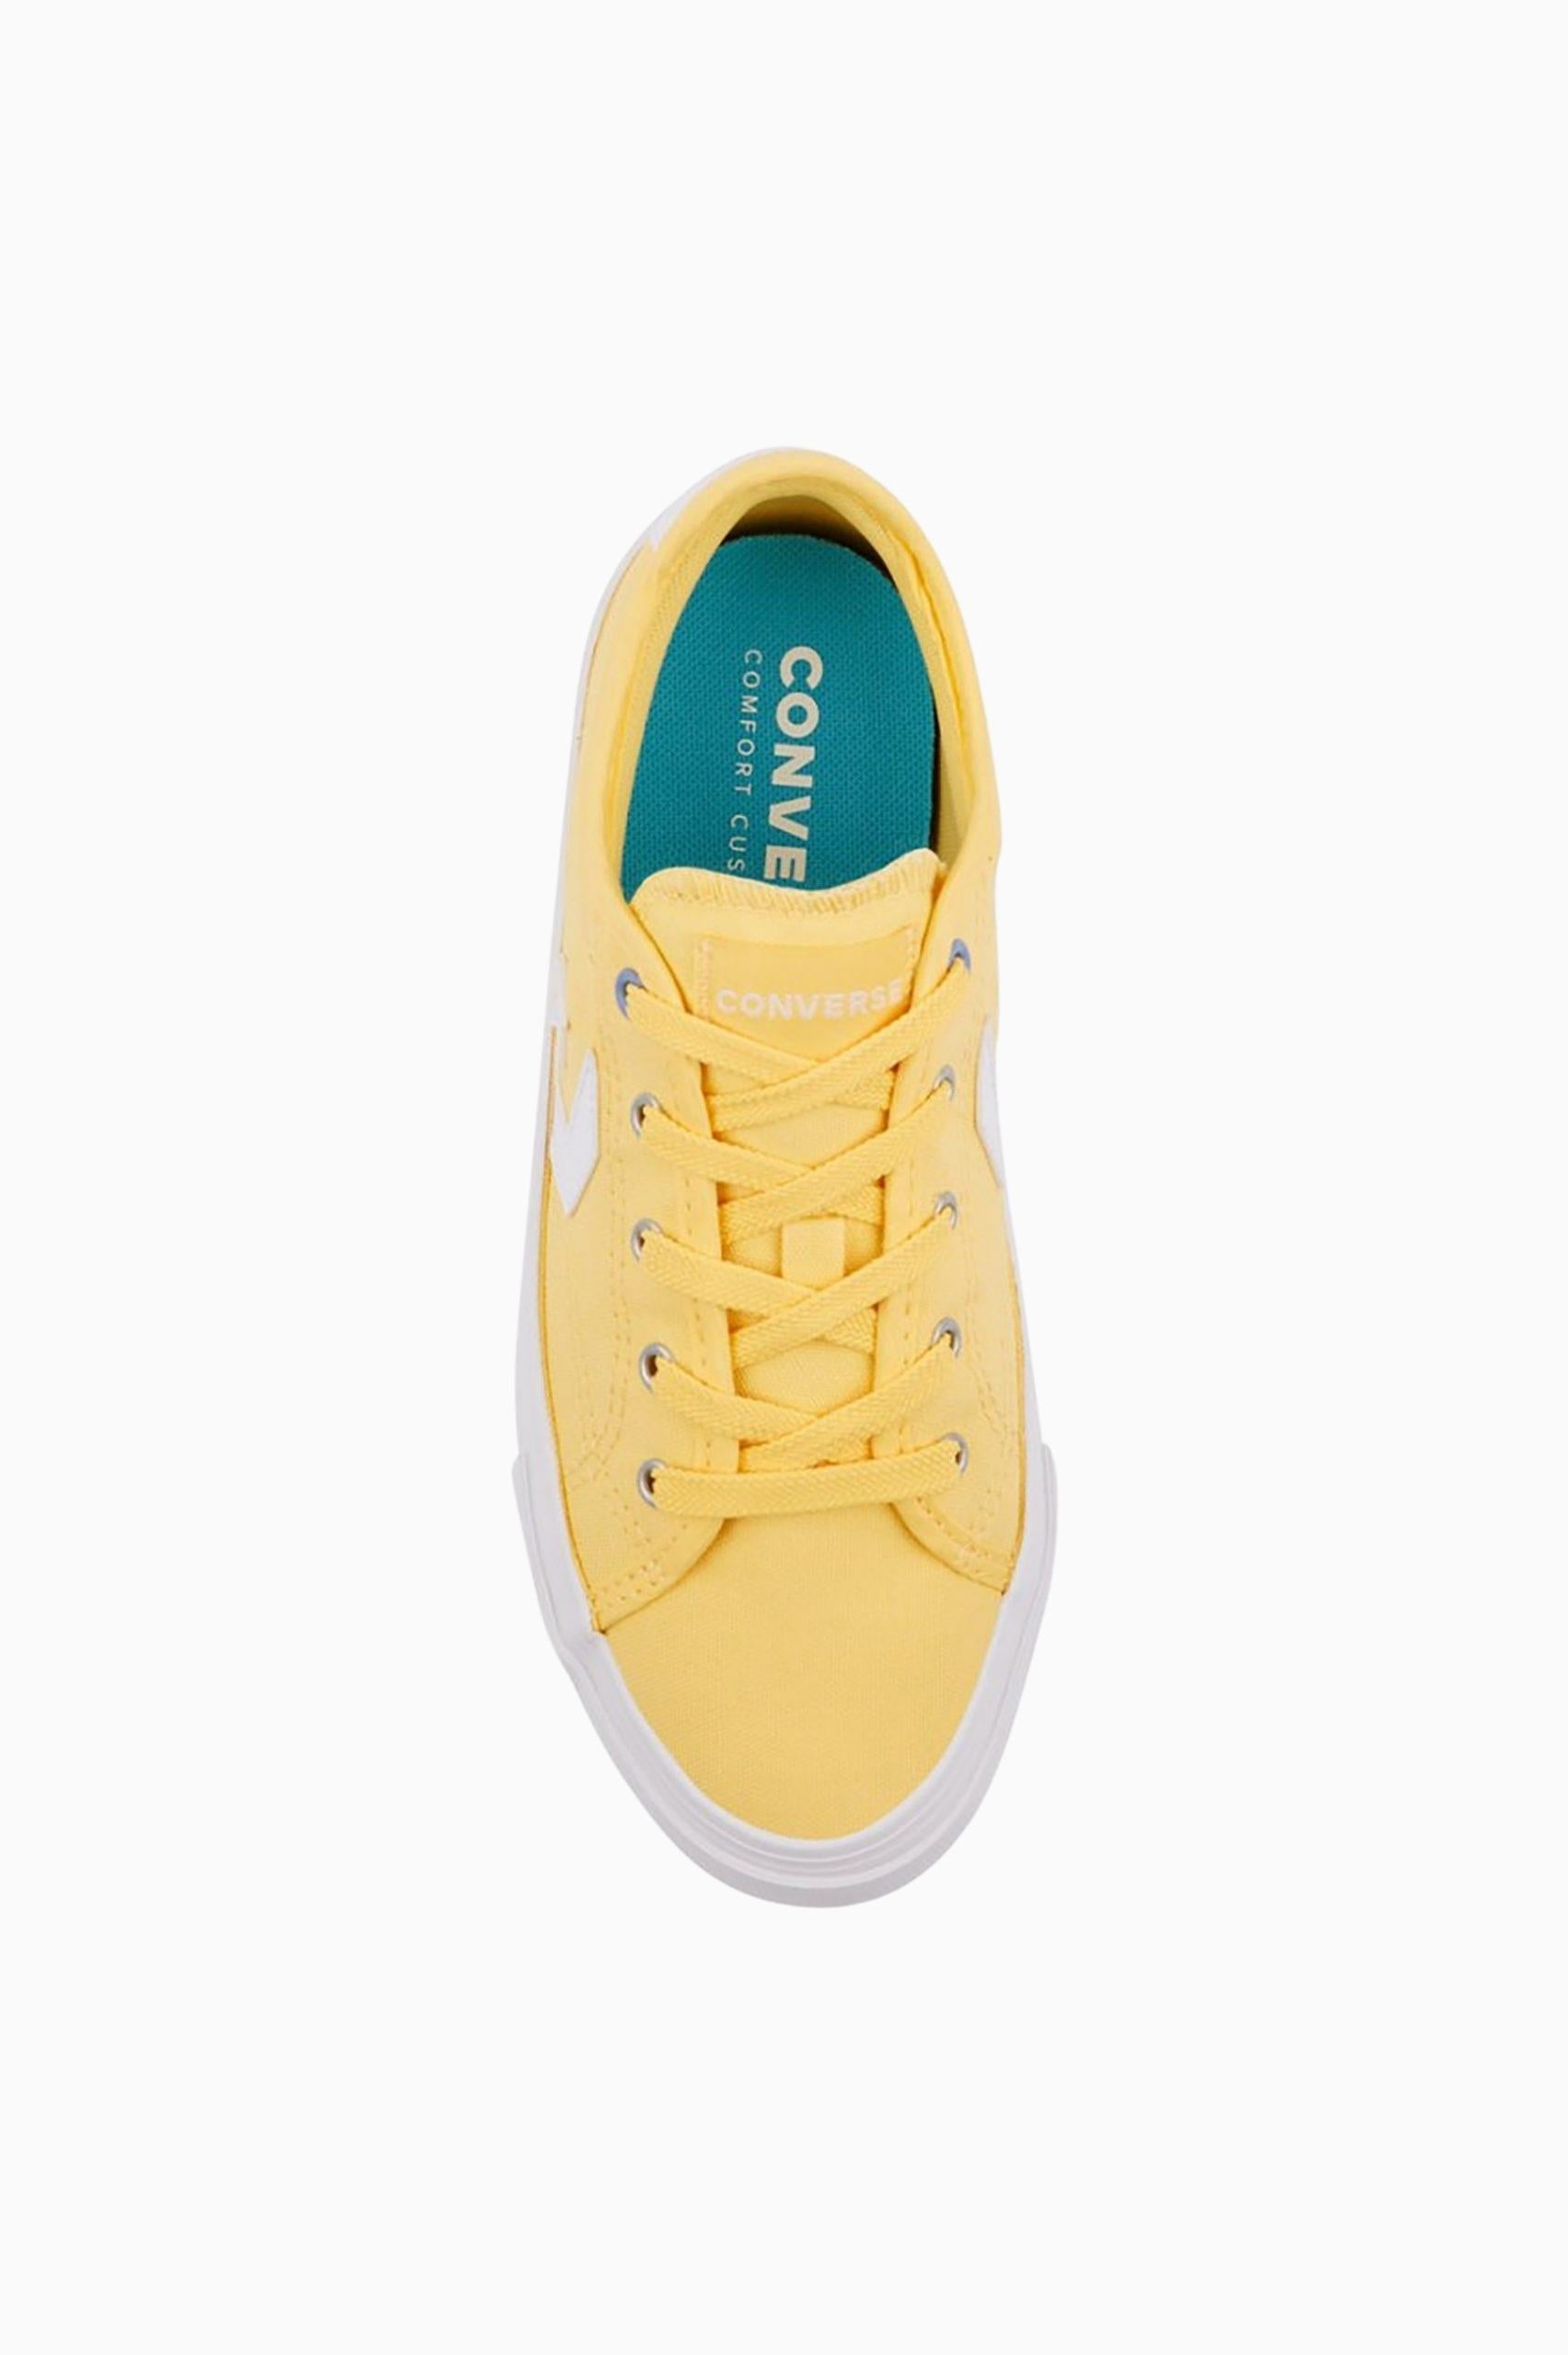 Converse Womens Star Replay Ox - Yellow